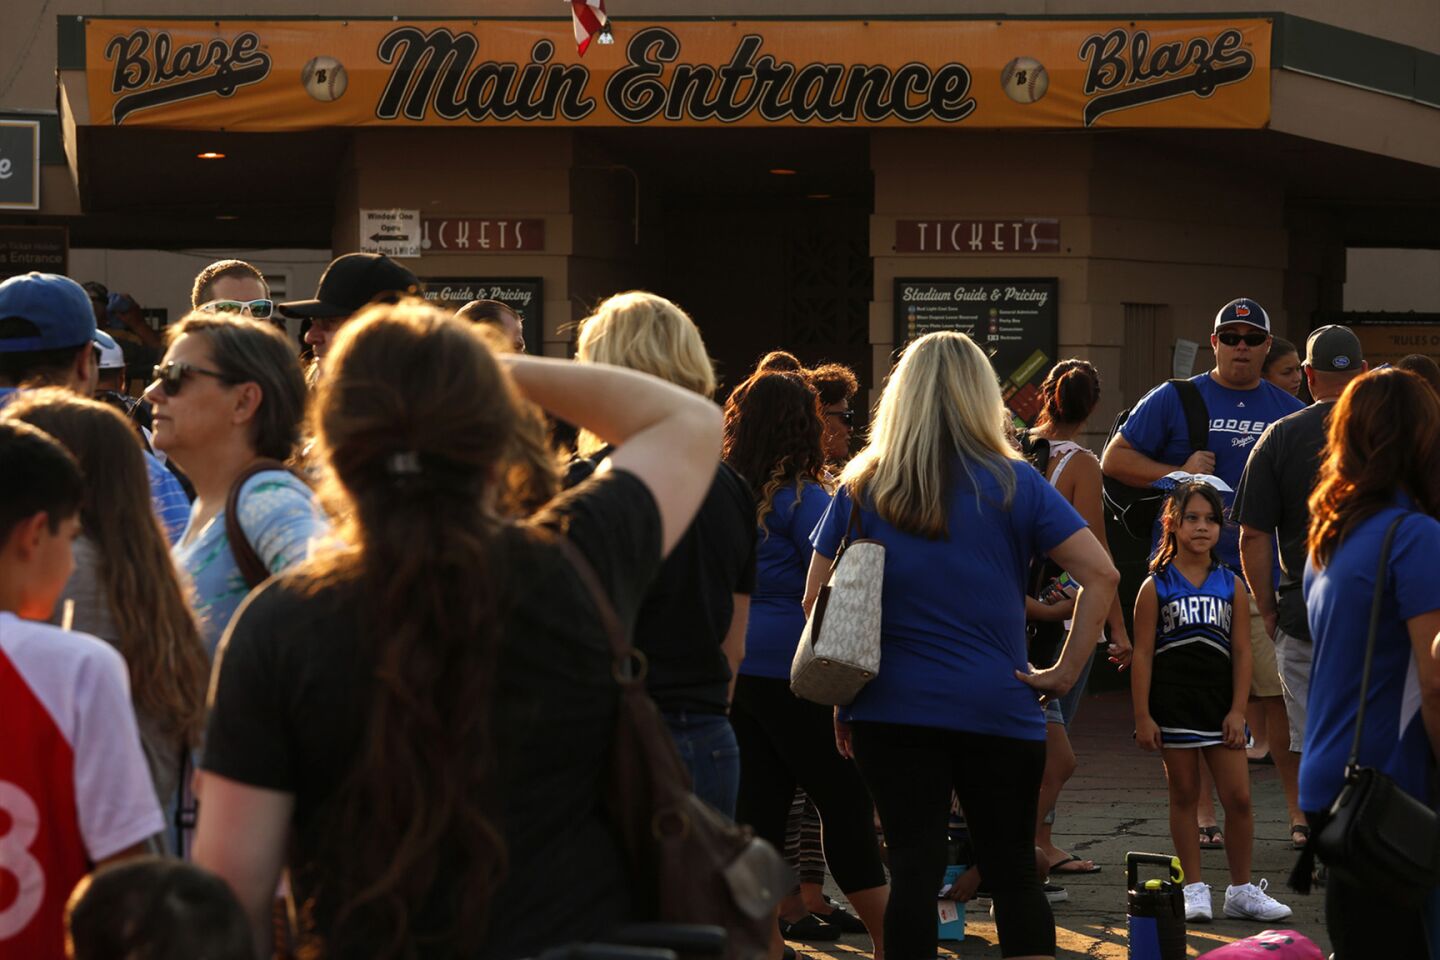 Fans wait to get into Sam Lynn Ballpark to attend one of the last games the Blaze will play in Bakersfield. Games often start around 8 p.m. during the longest days of summer because the batter's box faces into the setting sun.